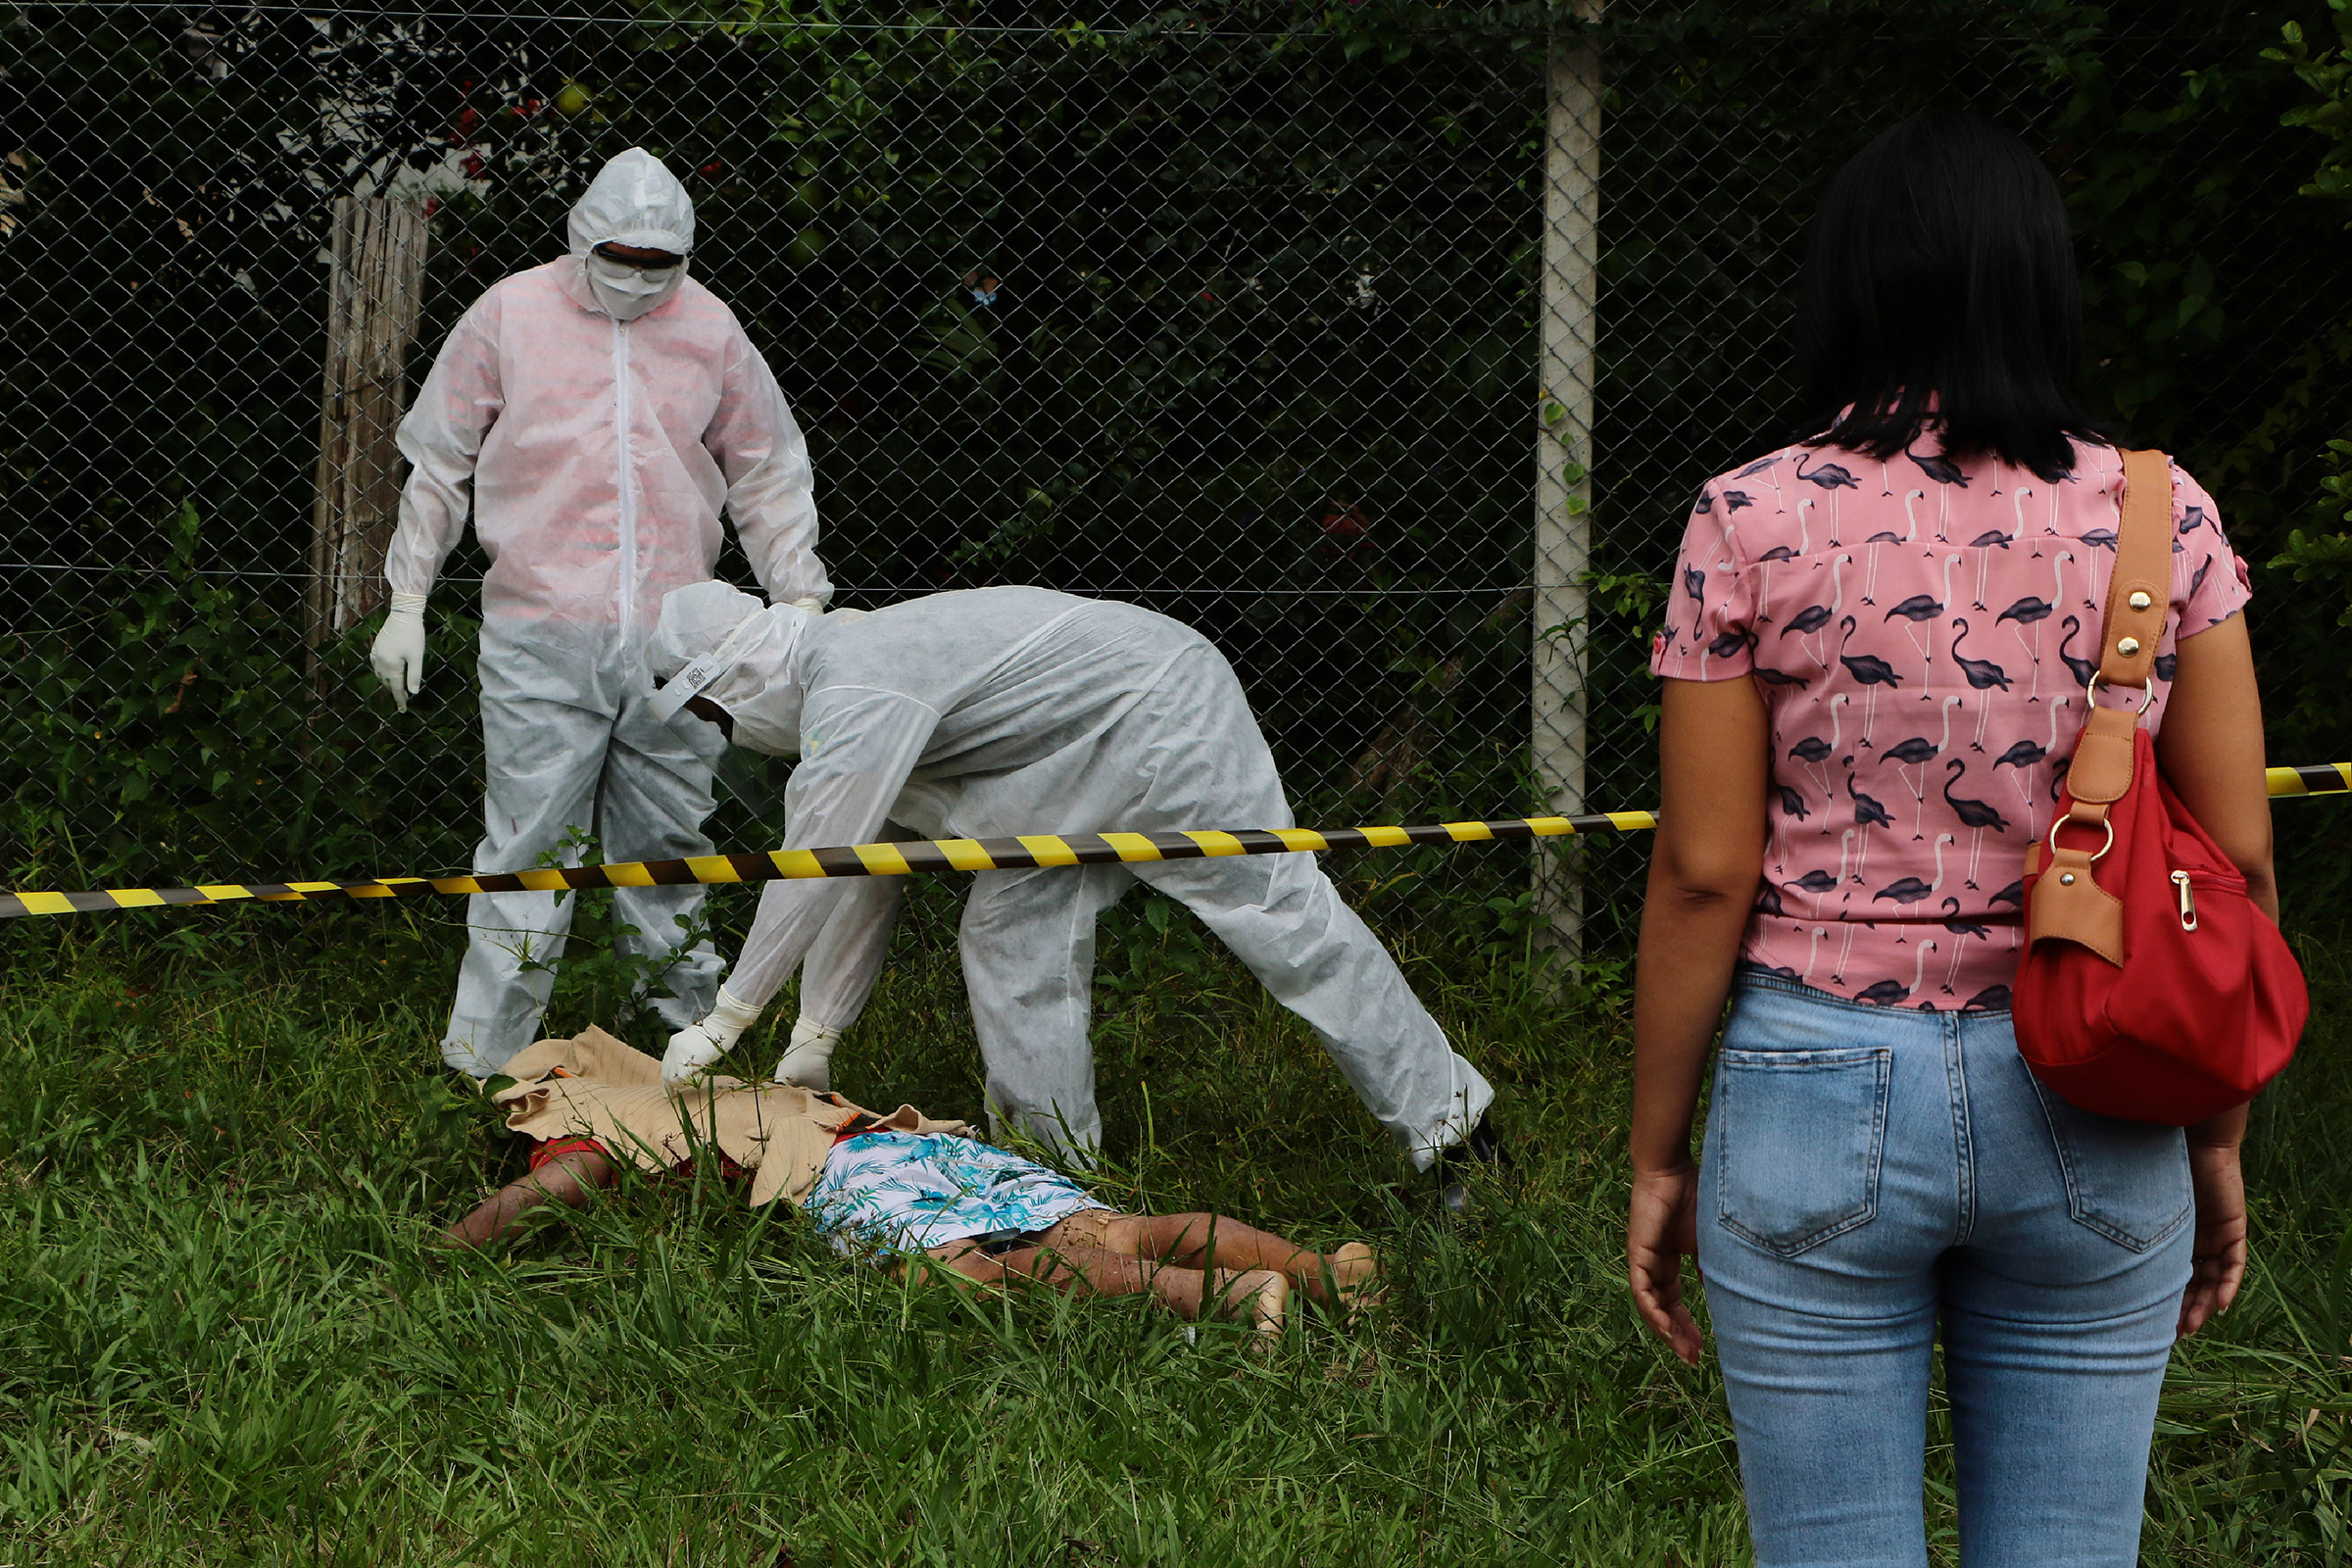 Government funeral workers cover the body of Arlen Laranjeira Bezerra, 39, near the Delphina Rinaldi Abdel Aziz Hospital in Manaus, in the Brazilian state of Amazonas, on May 5. Bezerra had been admitted to the hospital to undergo treatment for COVID-19. After escaping from the hospital at dawn, his body was found by family members approximately 650 feet (200 meters) away. (Edmar Barros—AP)